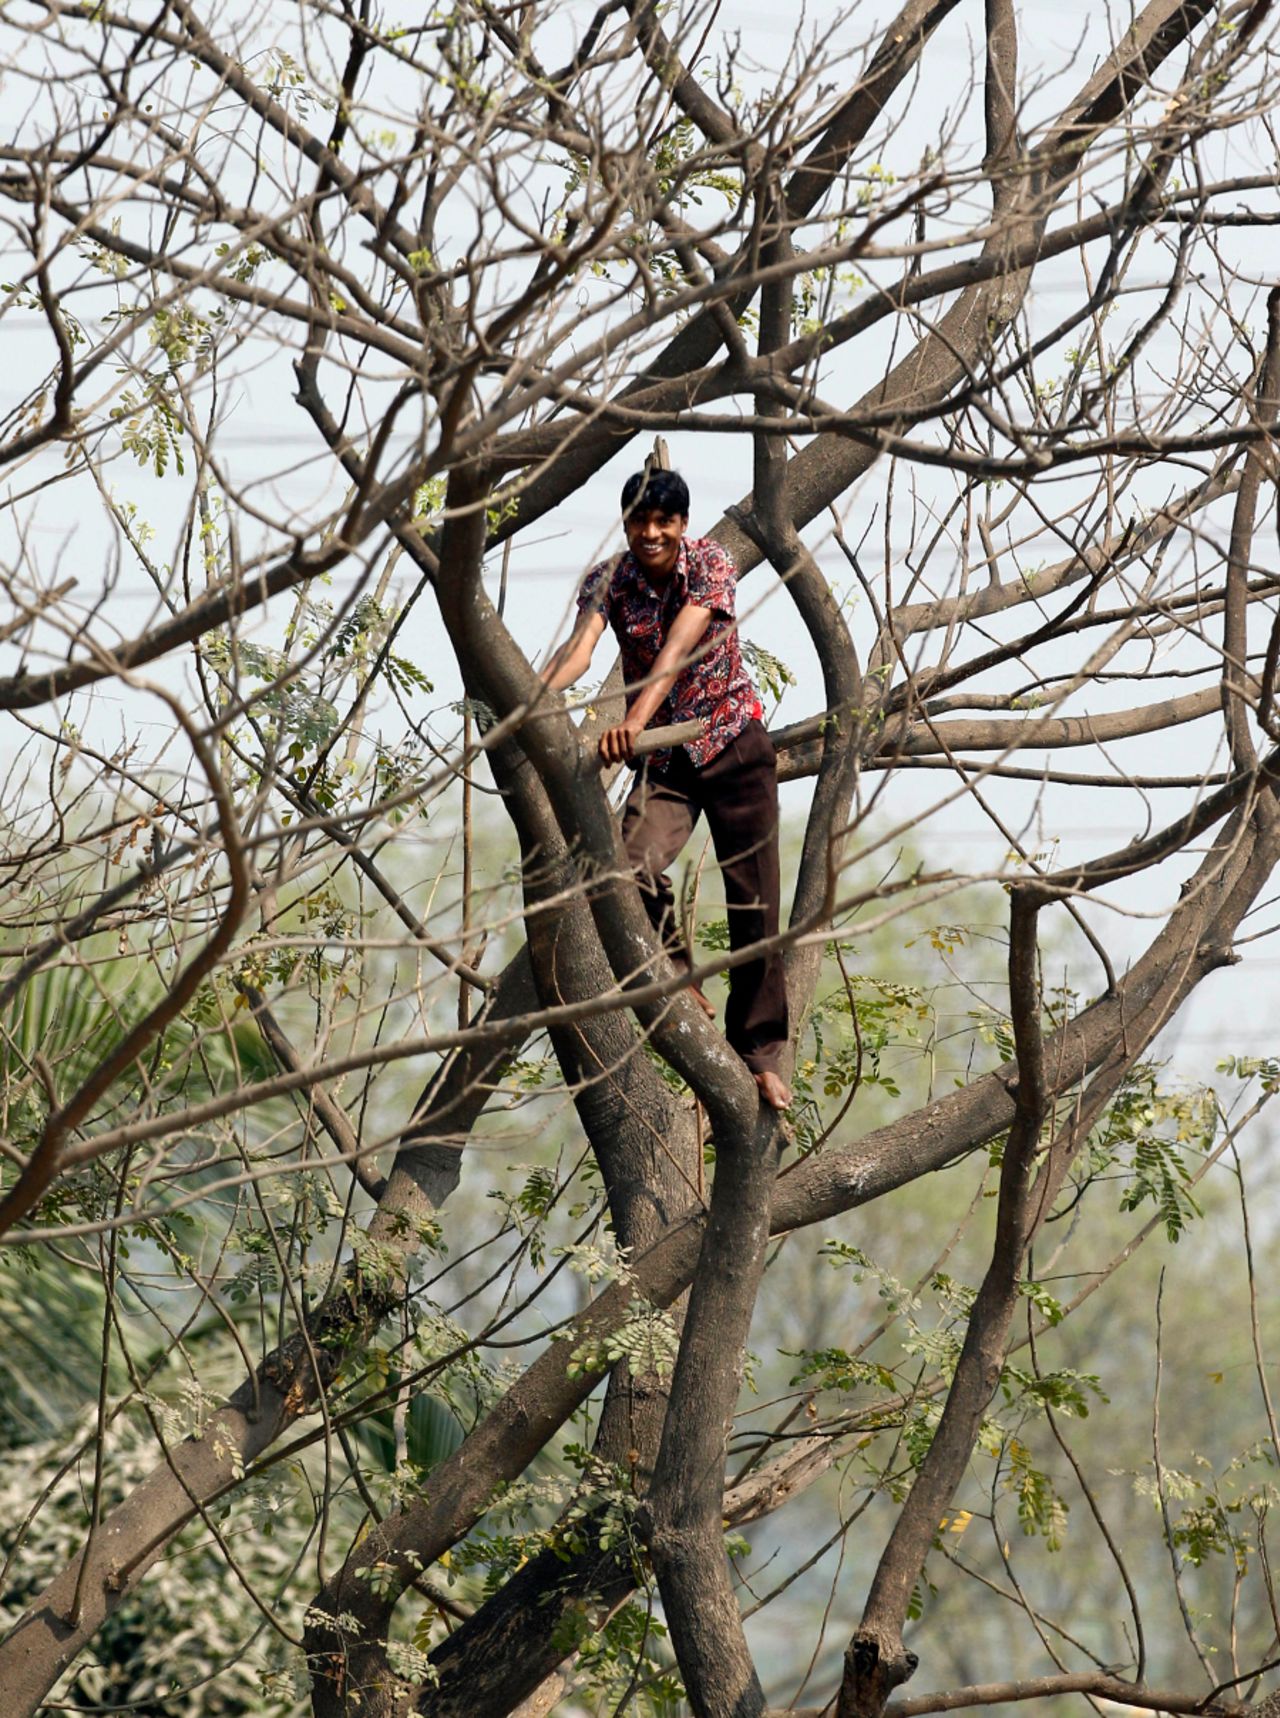 A Bangladeshi cricket fan climbs a tree to get a better look at England's warm-up game, Canada v England, World Cup warm-up match, Fatullah, February 16, 2011